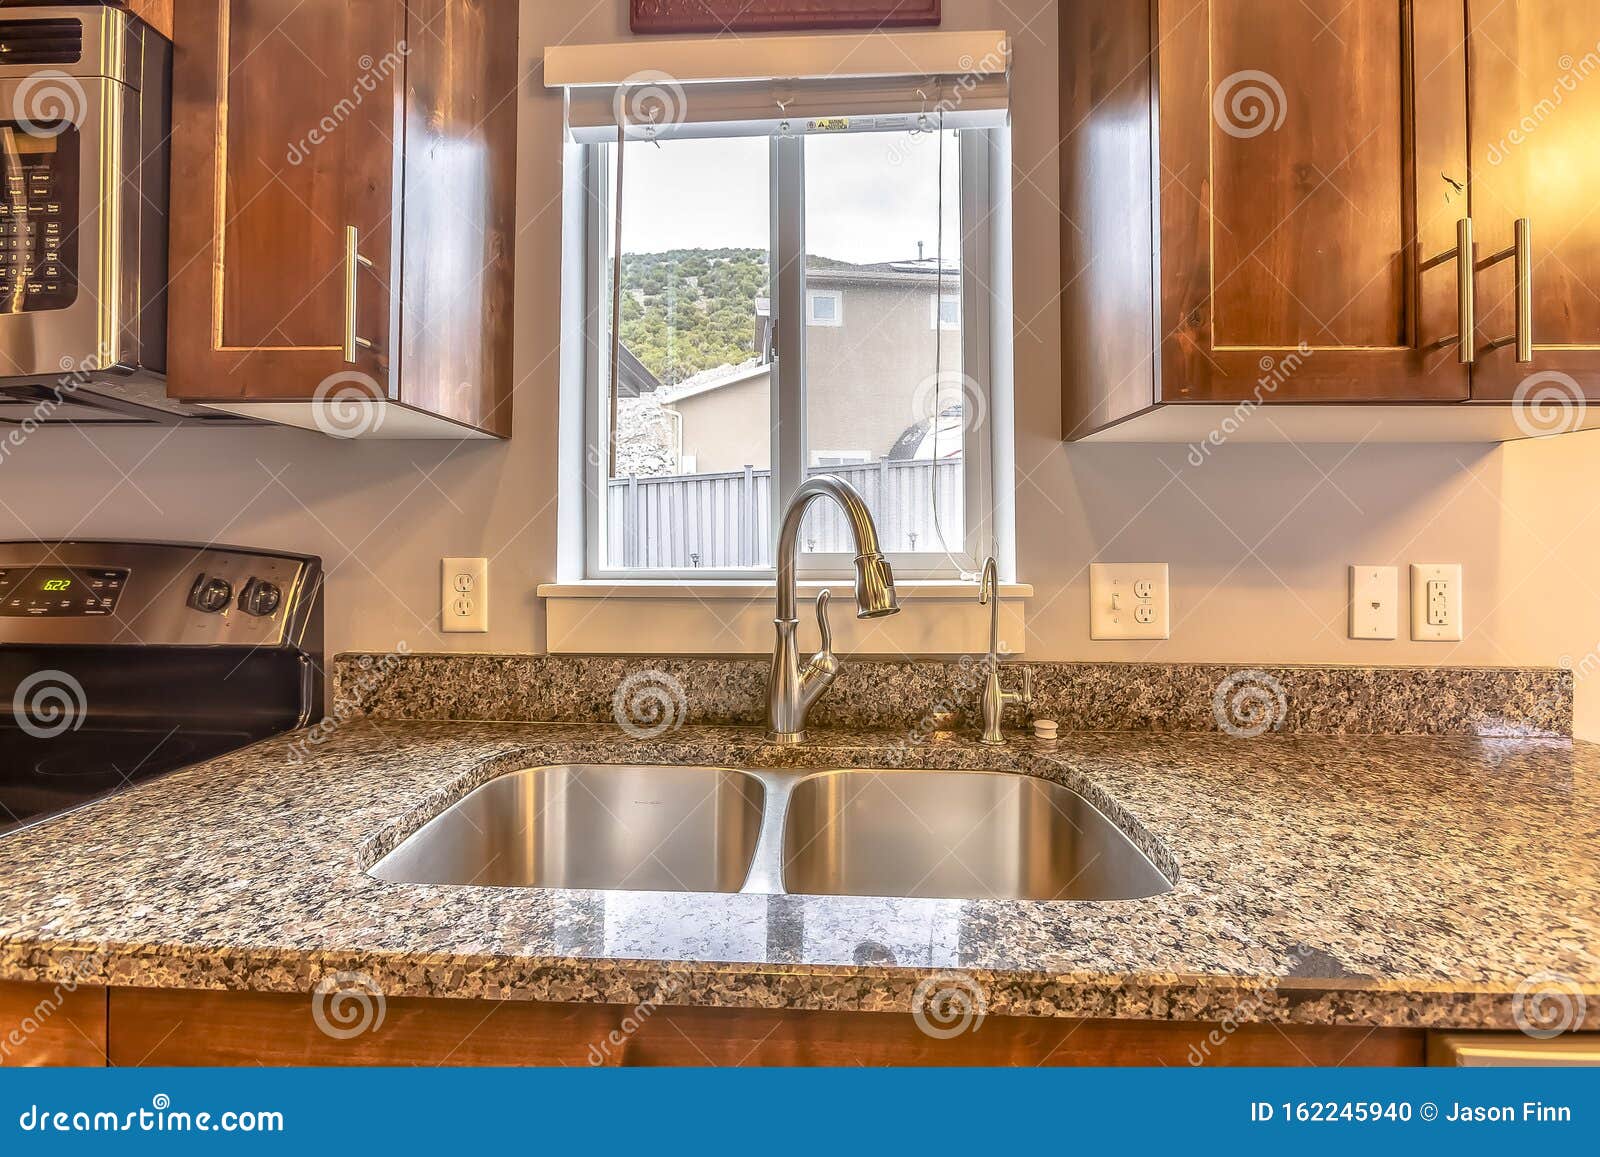 Stainless Steel Sink In A Marble Kitchen Counter Stock Photo Image Of Architecture Elegance 162245940